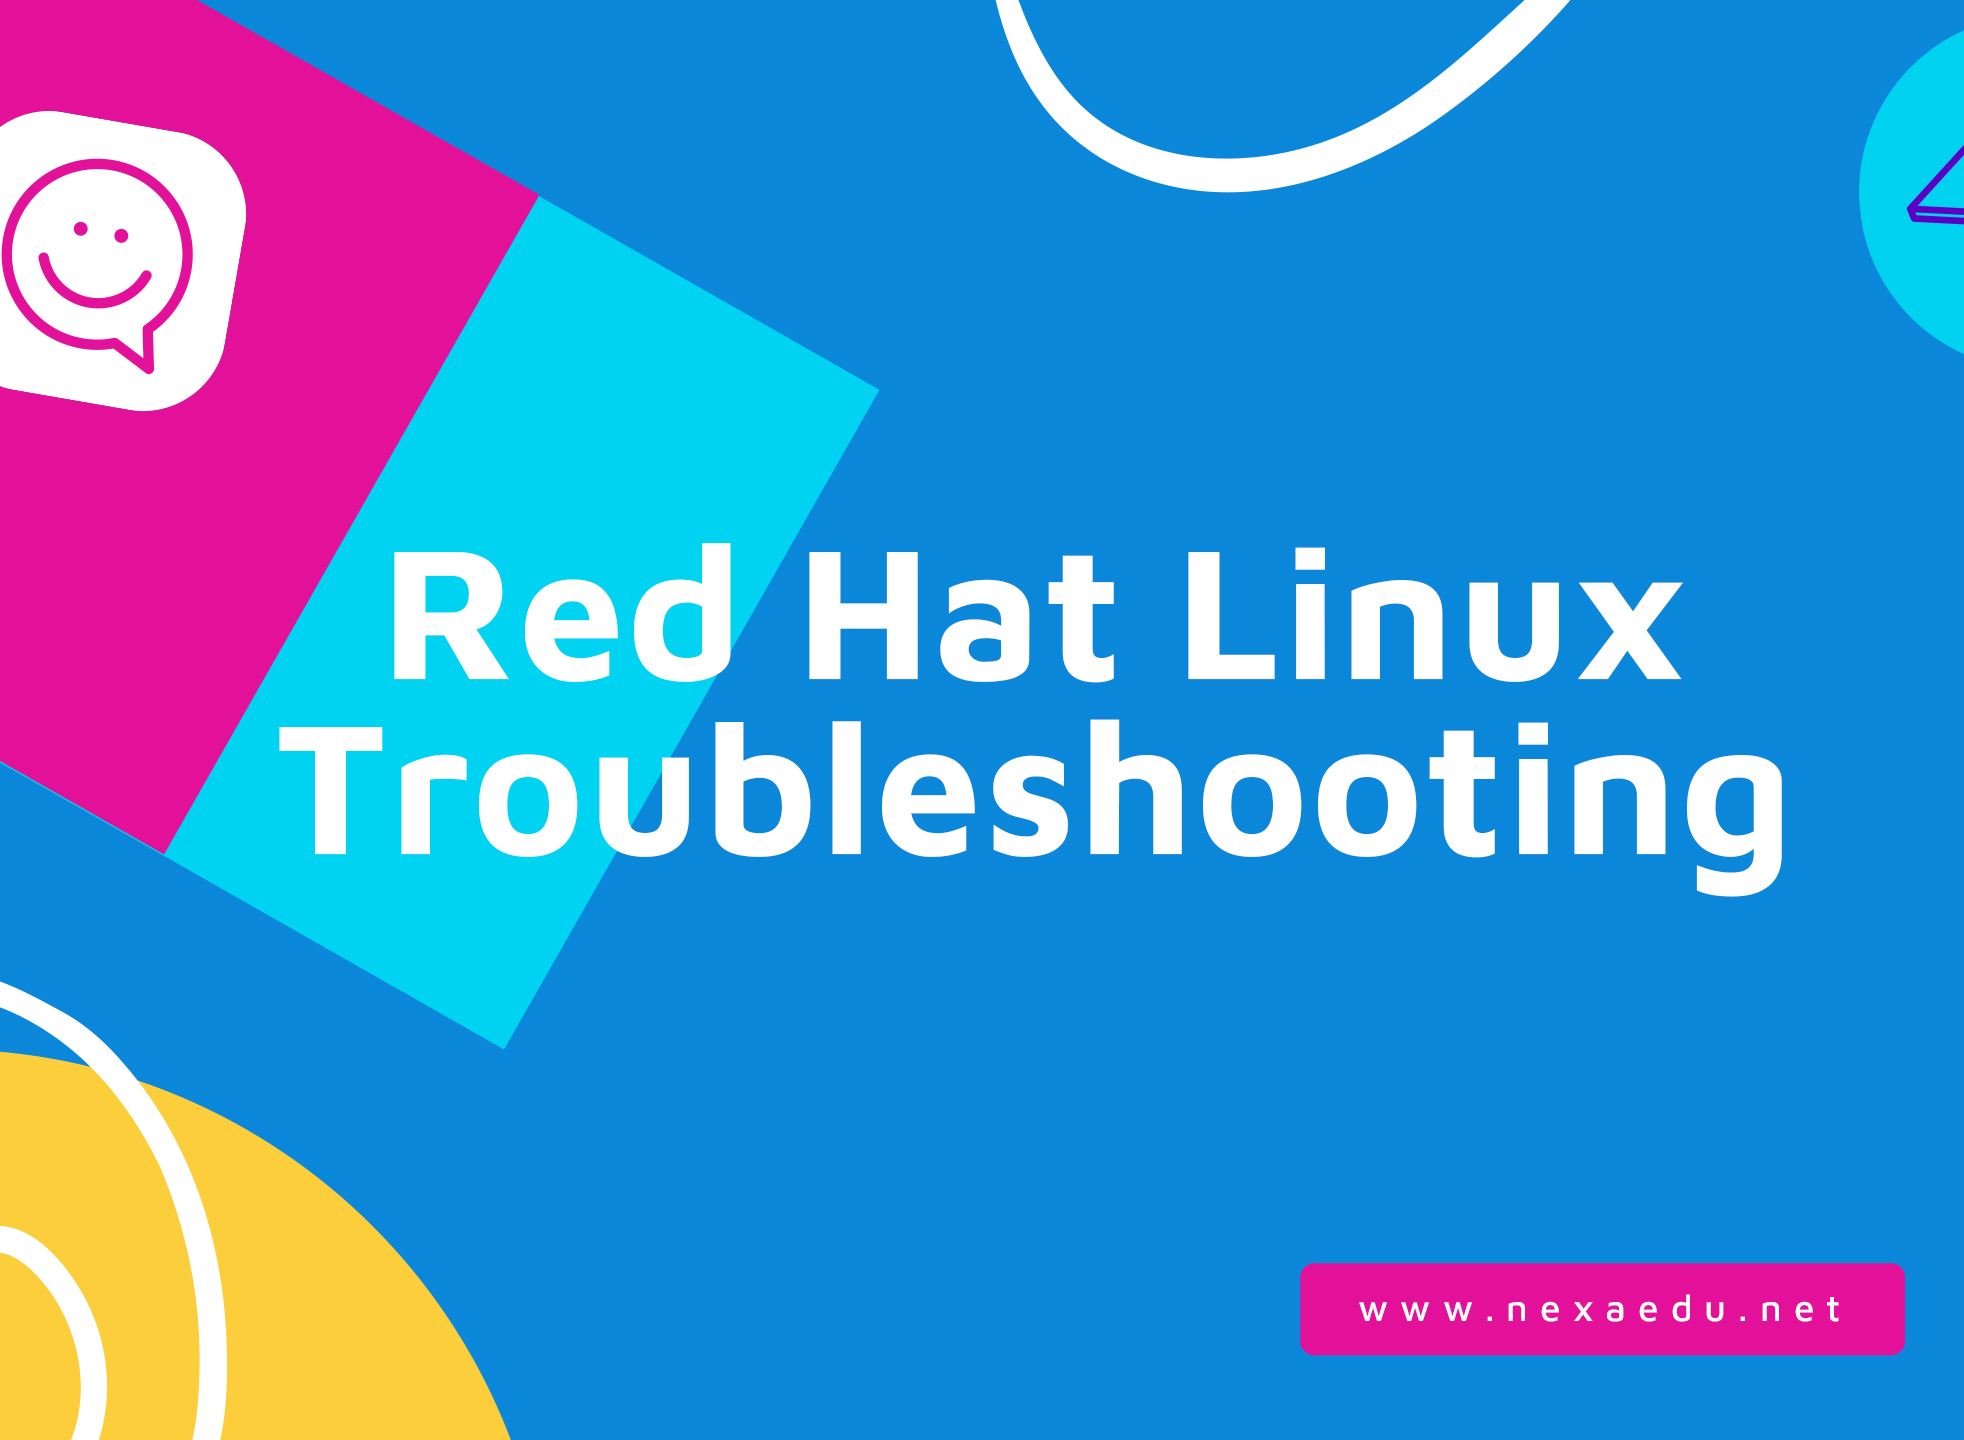 Red Hat Linux Troubleshooting